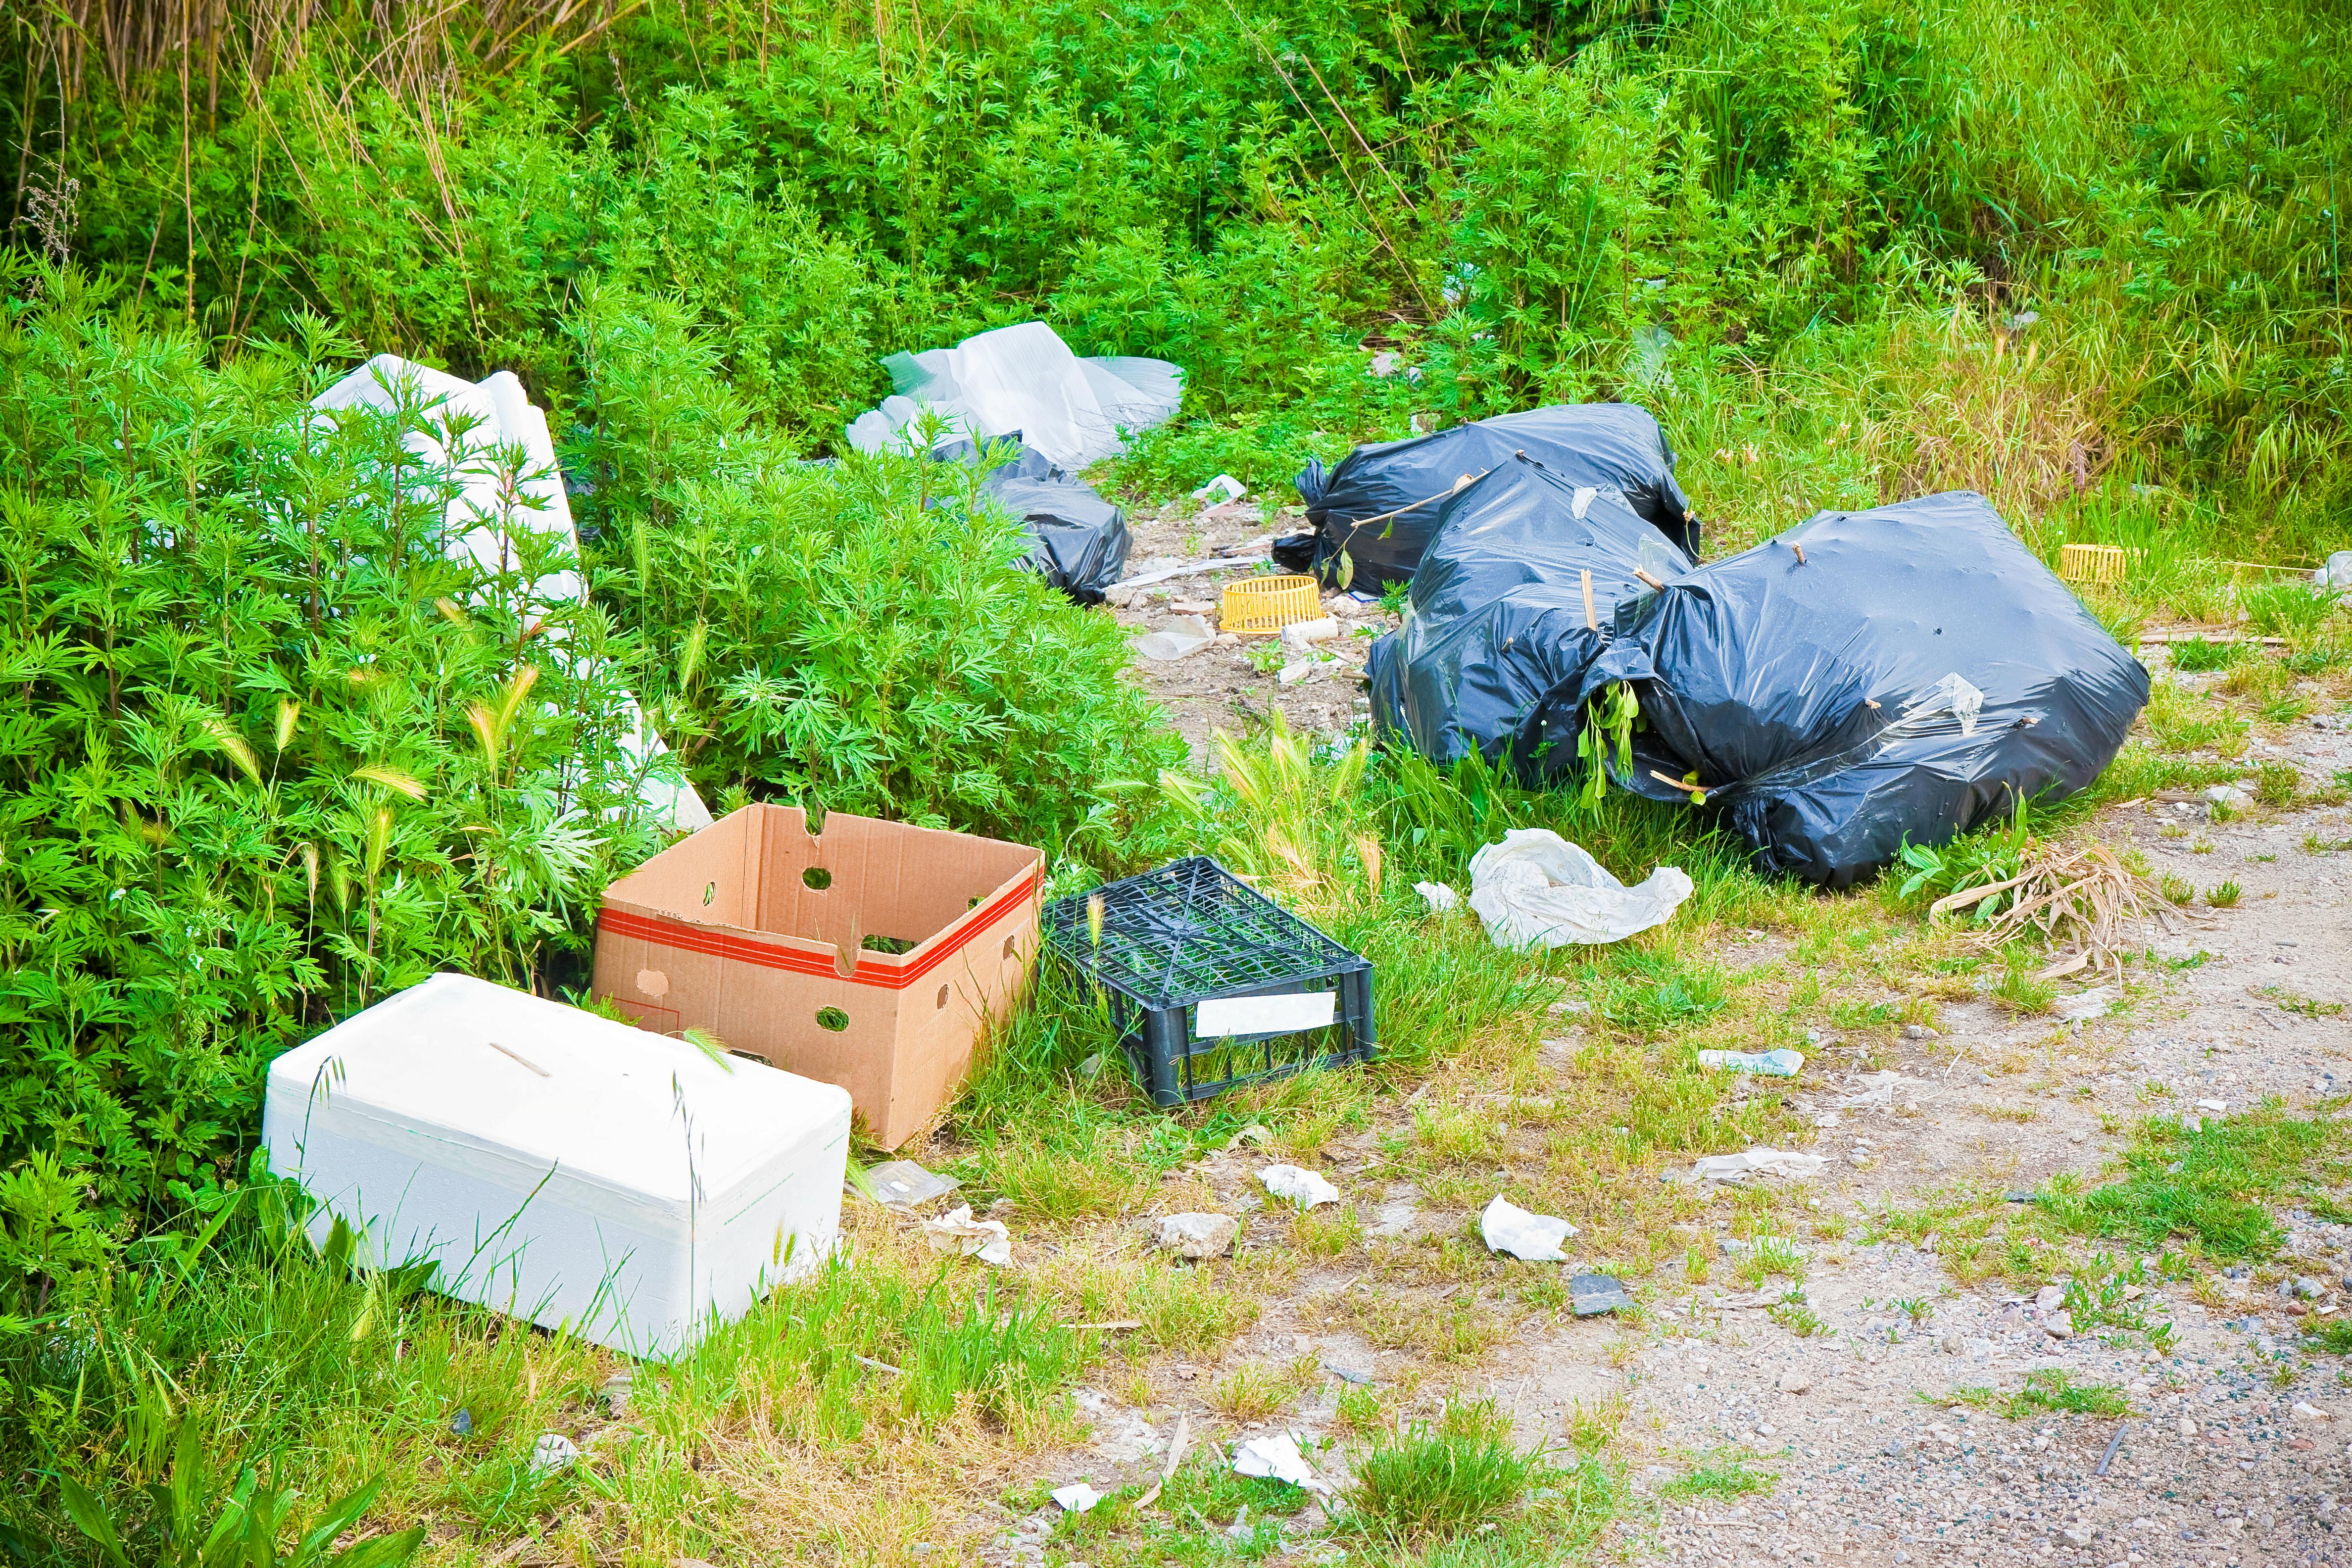 Illegal dump sites are up this year in Nova Scotia, particularly during closures of landfill sites from March to June due to COVID-19.